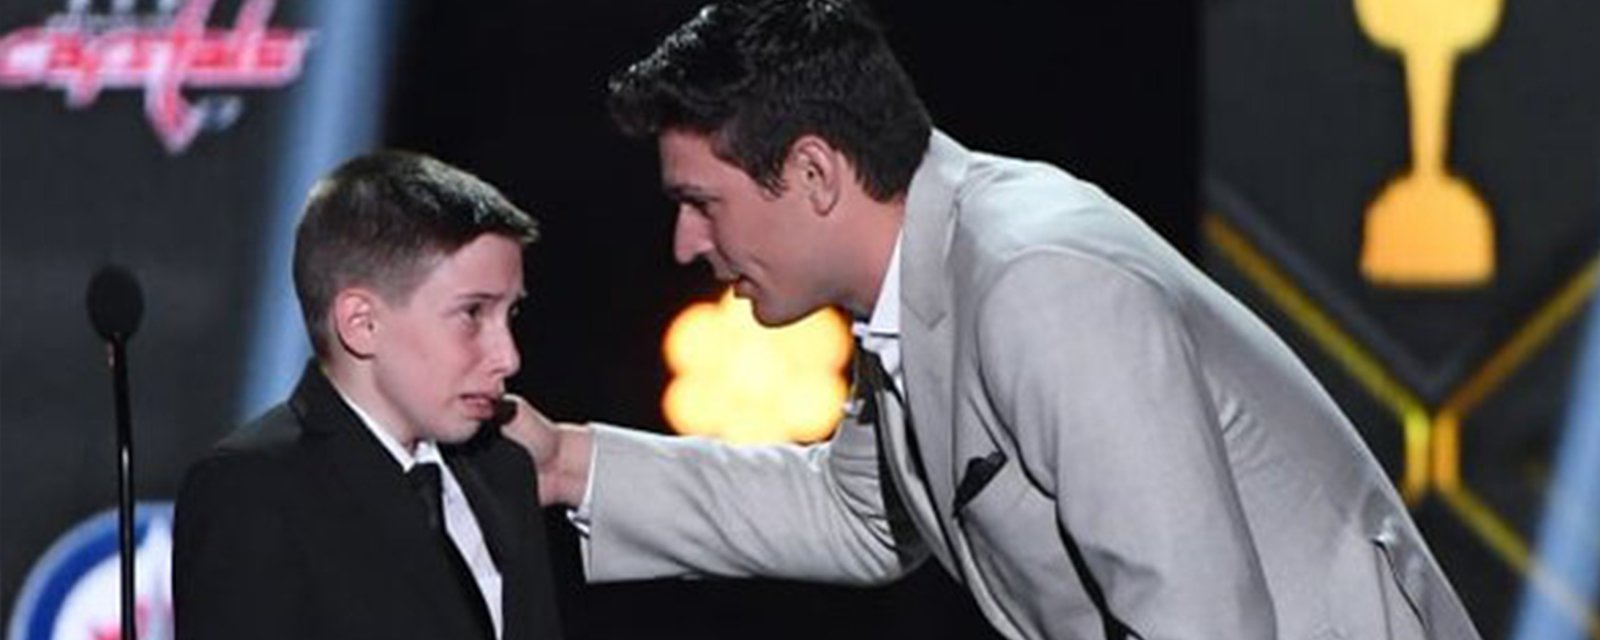 Carey Price wore his wife's panties on stage at the NHL Awards